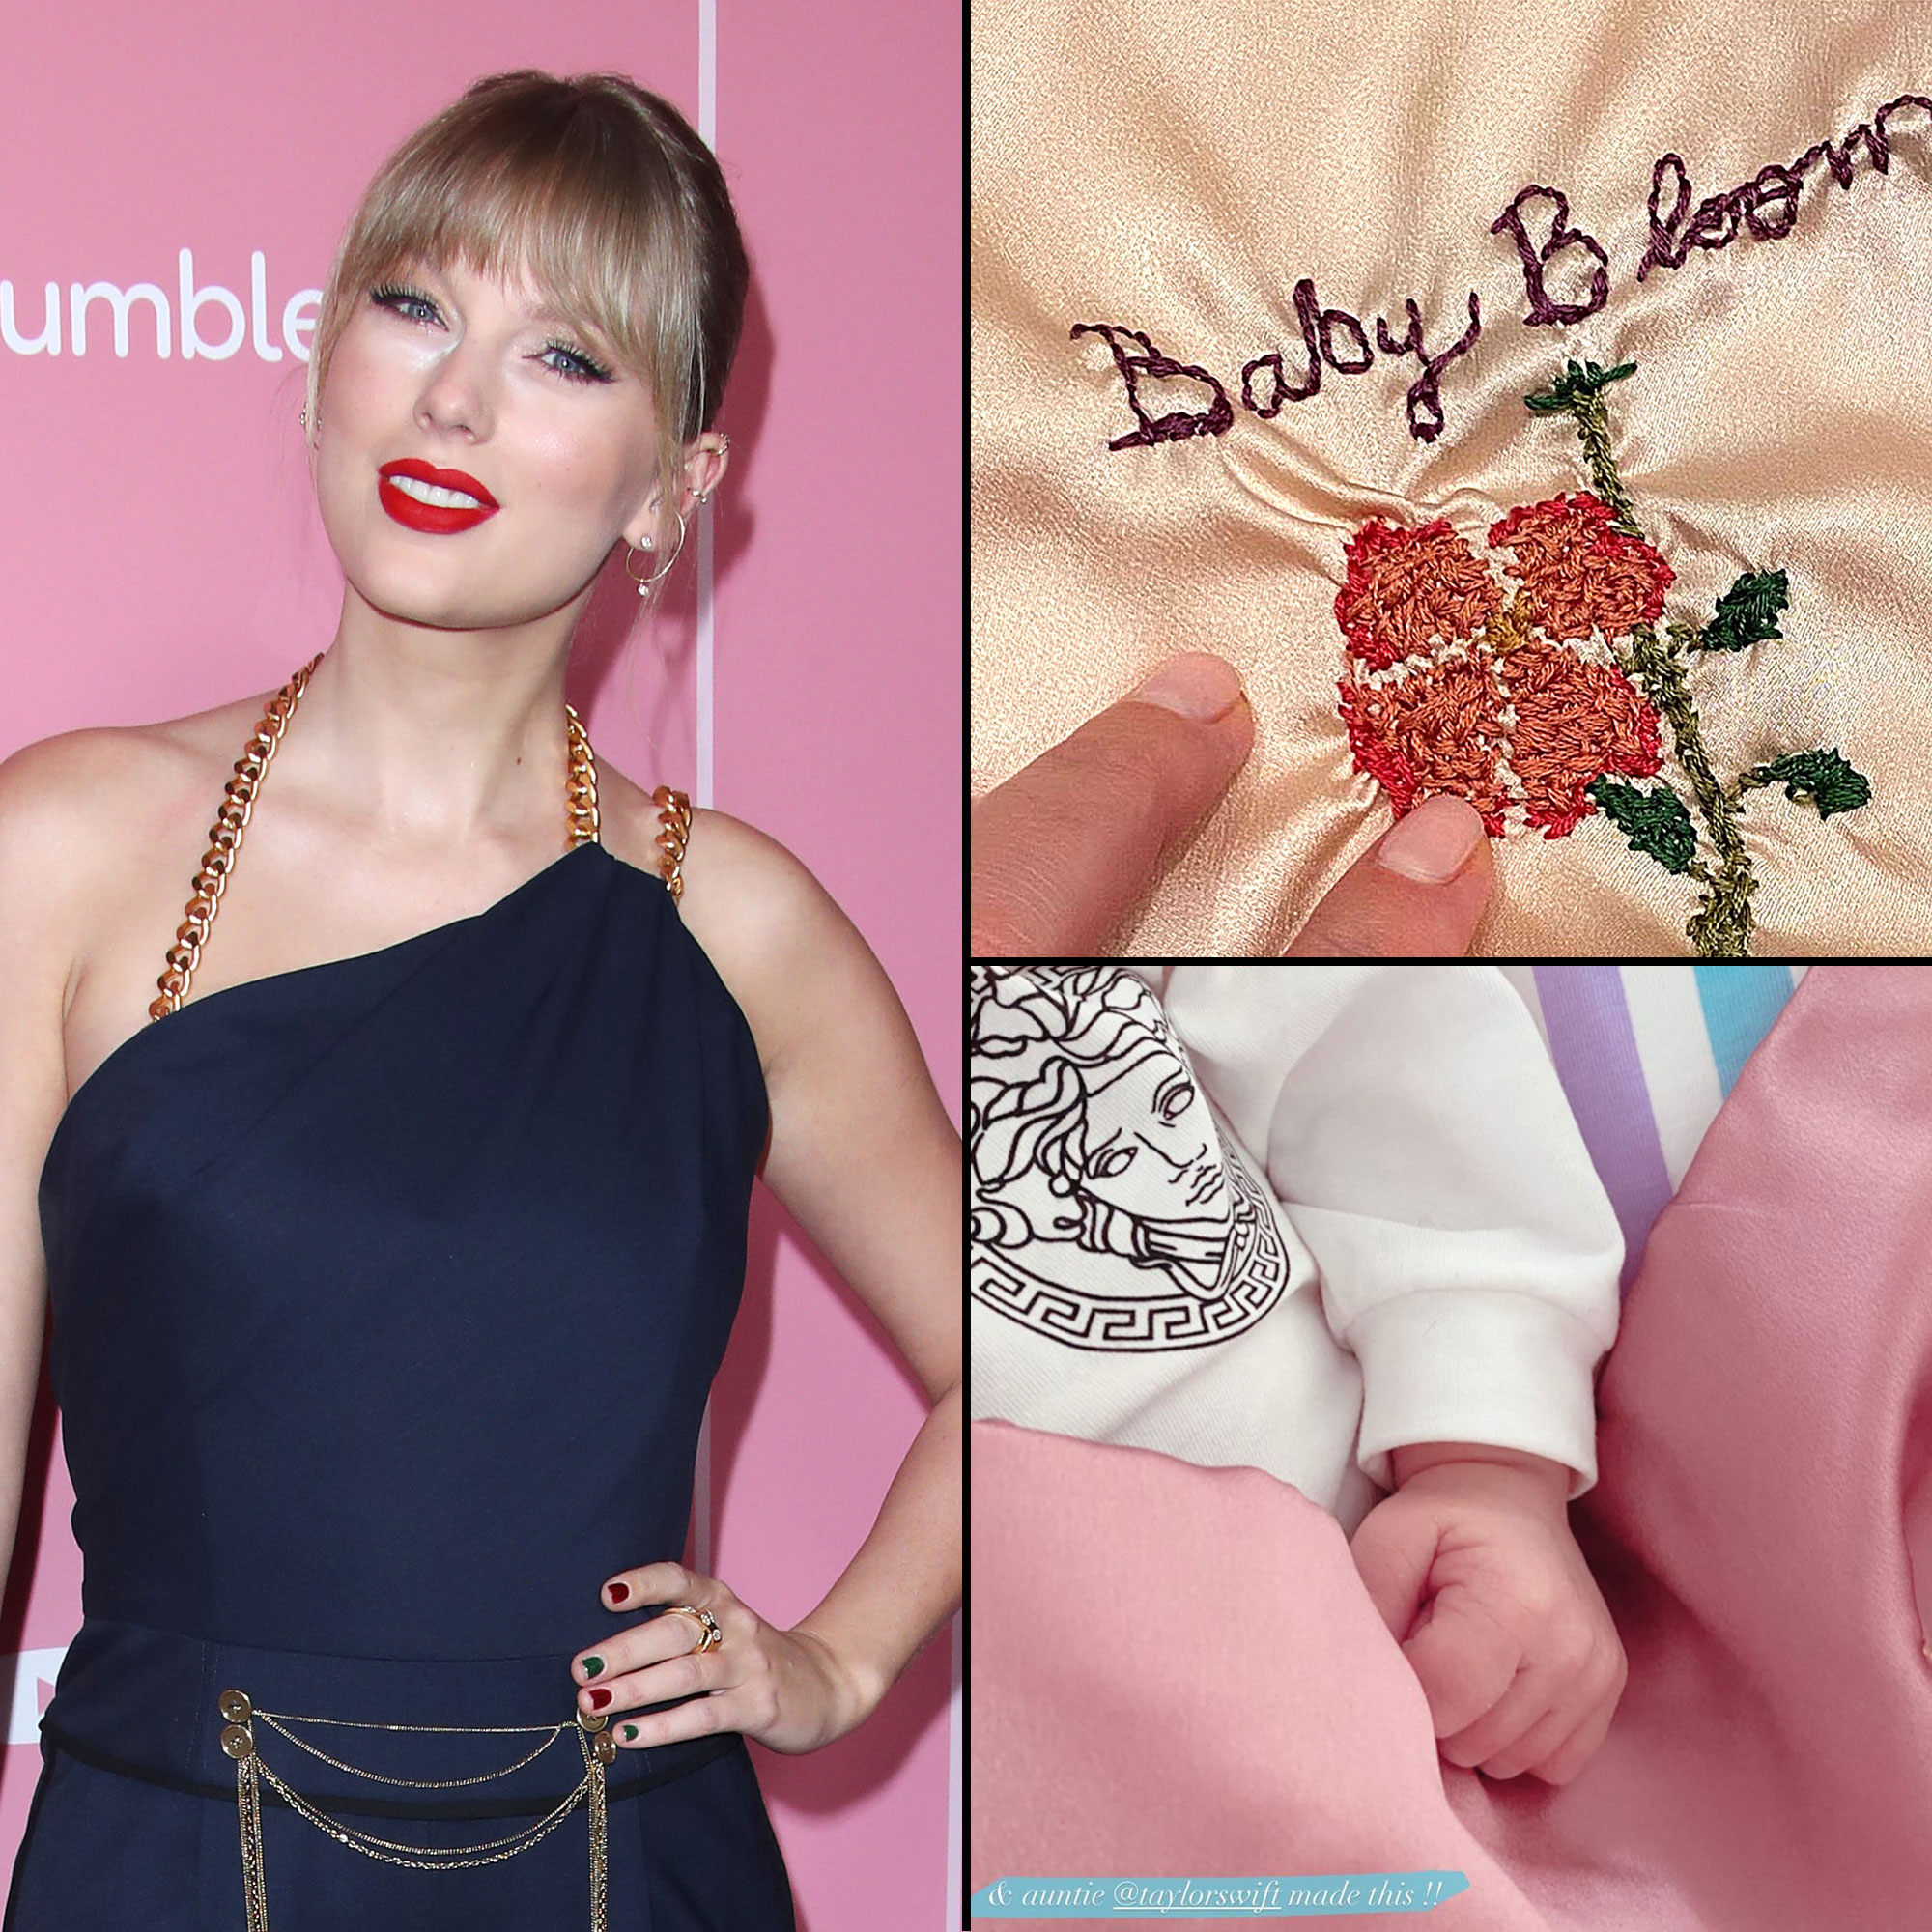 12 seriously sweet gifts for the friend who is celebrity-obsessed